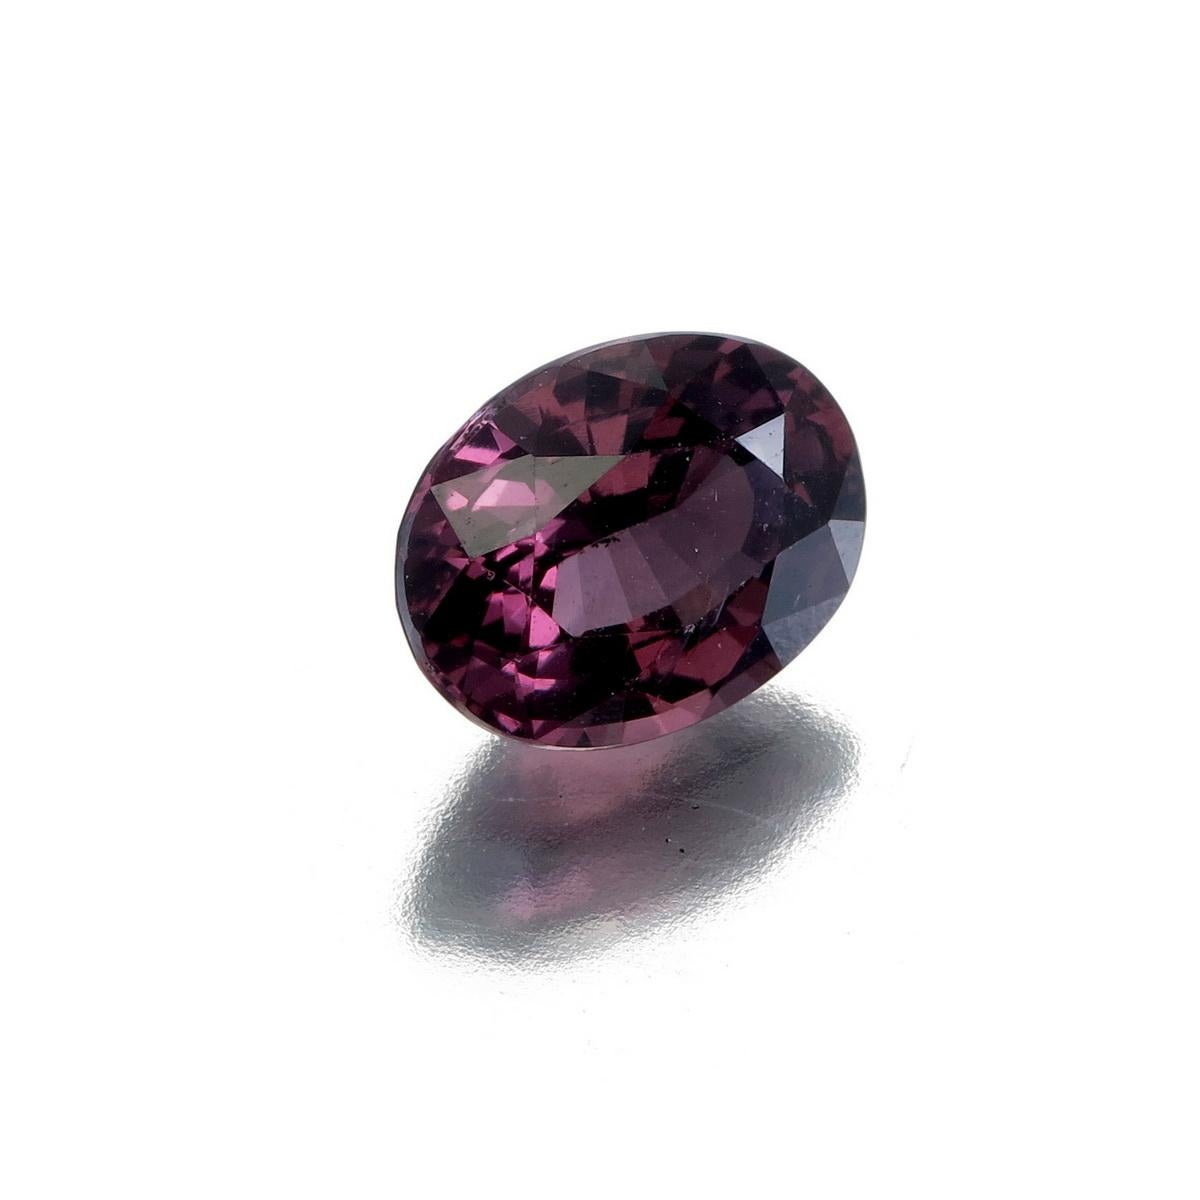 3.17 Carat Natural Purple Spinel from Burma (Myna mar)
Dimension: 10.17 x 7.86 x 5.29 mm
Weight: 3.17 Carat
Shape: Oval Faceted Cut
No Heat
GIL Certified  Report No: ST02022102151323